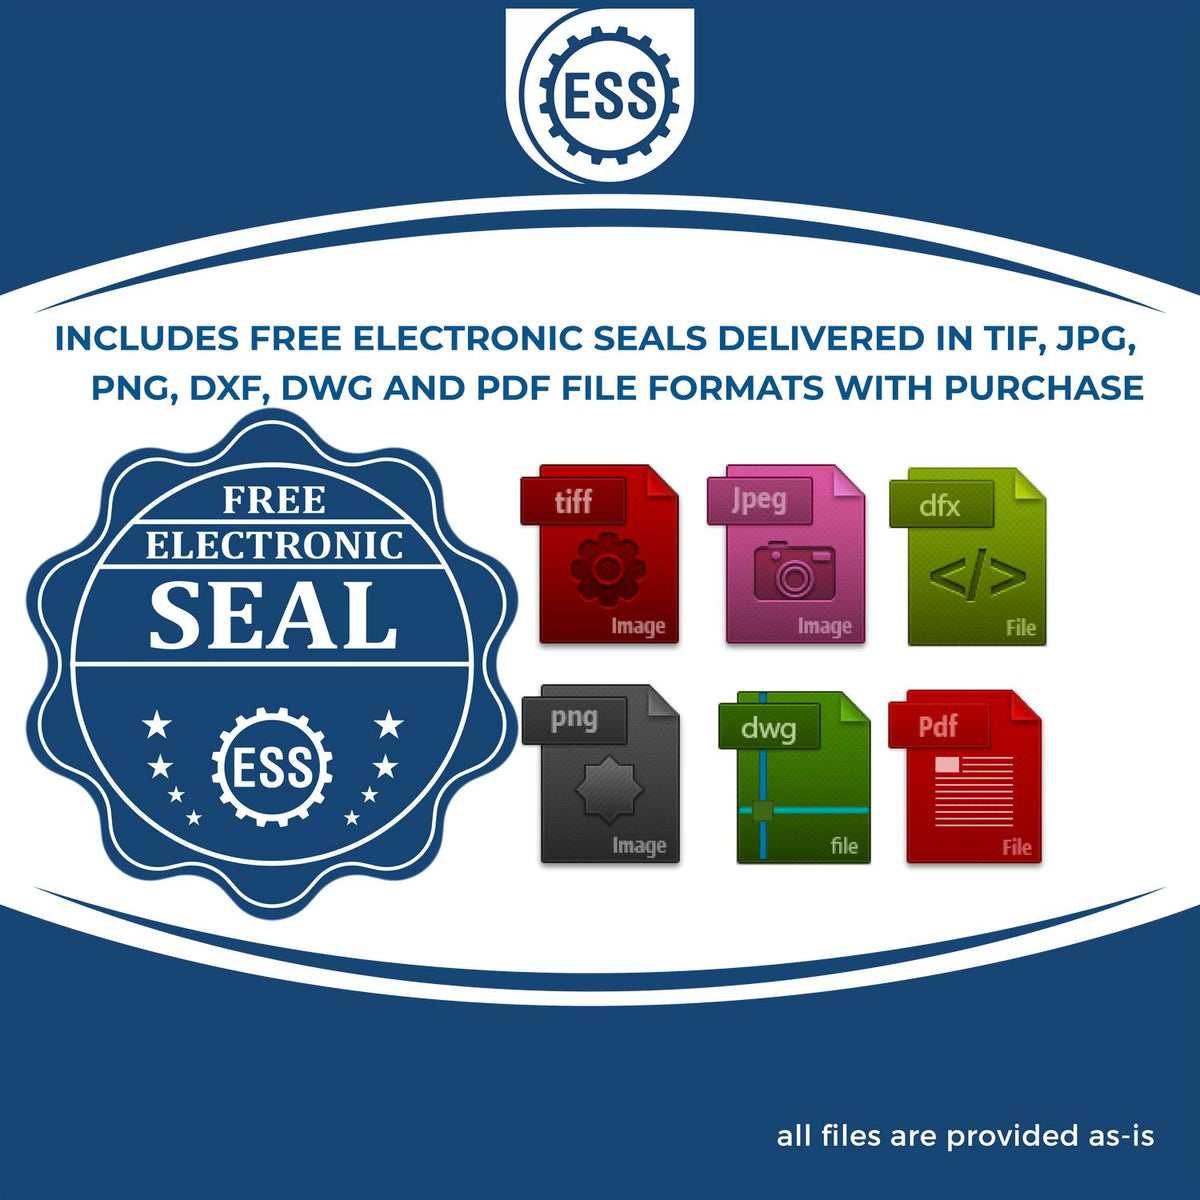 An infographic for the free electronic seal for the State of West Virginia Extended Long Reach Geologist Seal illustrating the different file type icons such as DXF, DWG, TIF, JPG and PNG.